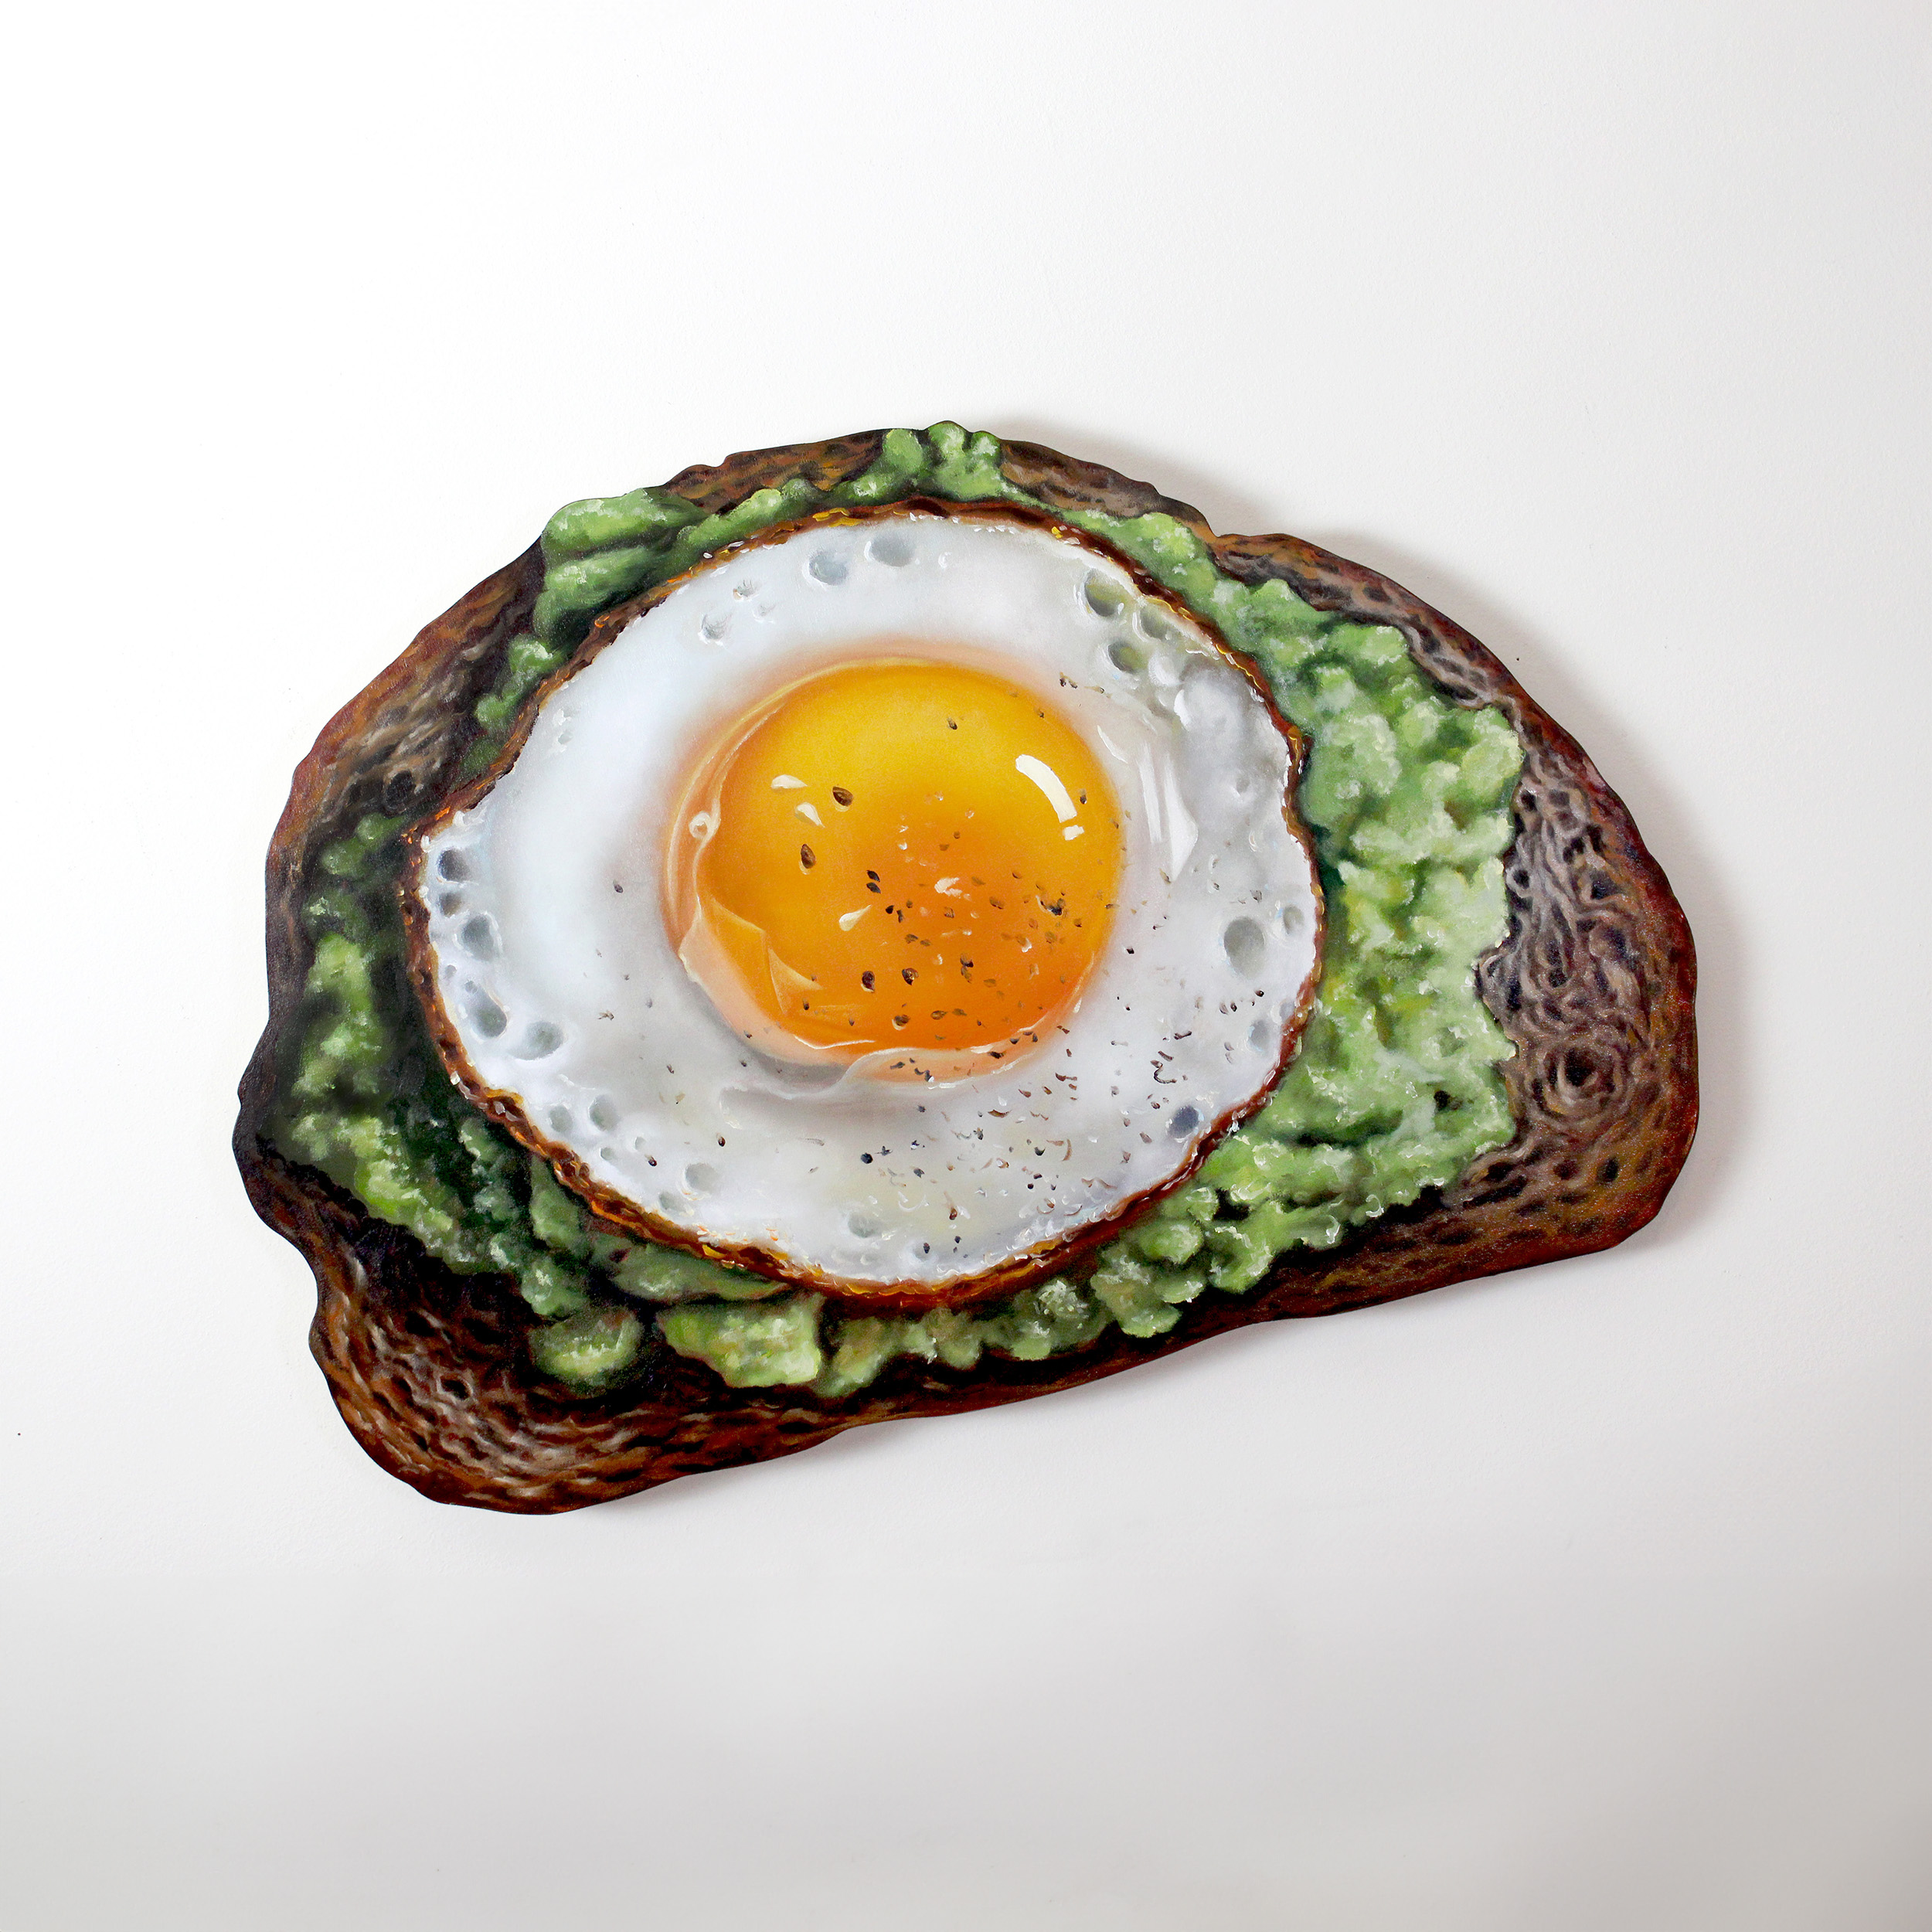 "Avocado Toast I" 16x24" Original 3D Cut-Out Oil Painting by Abra Johnson